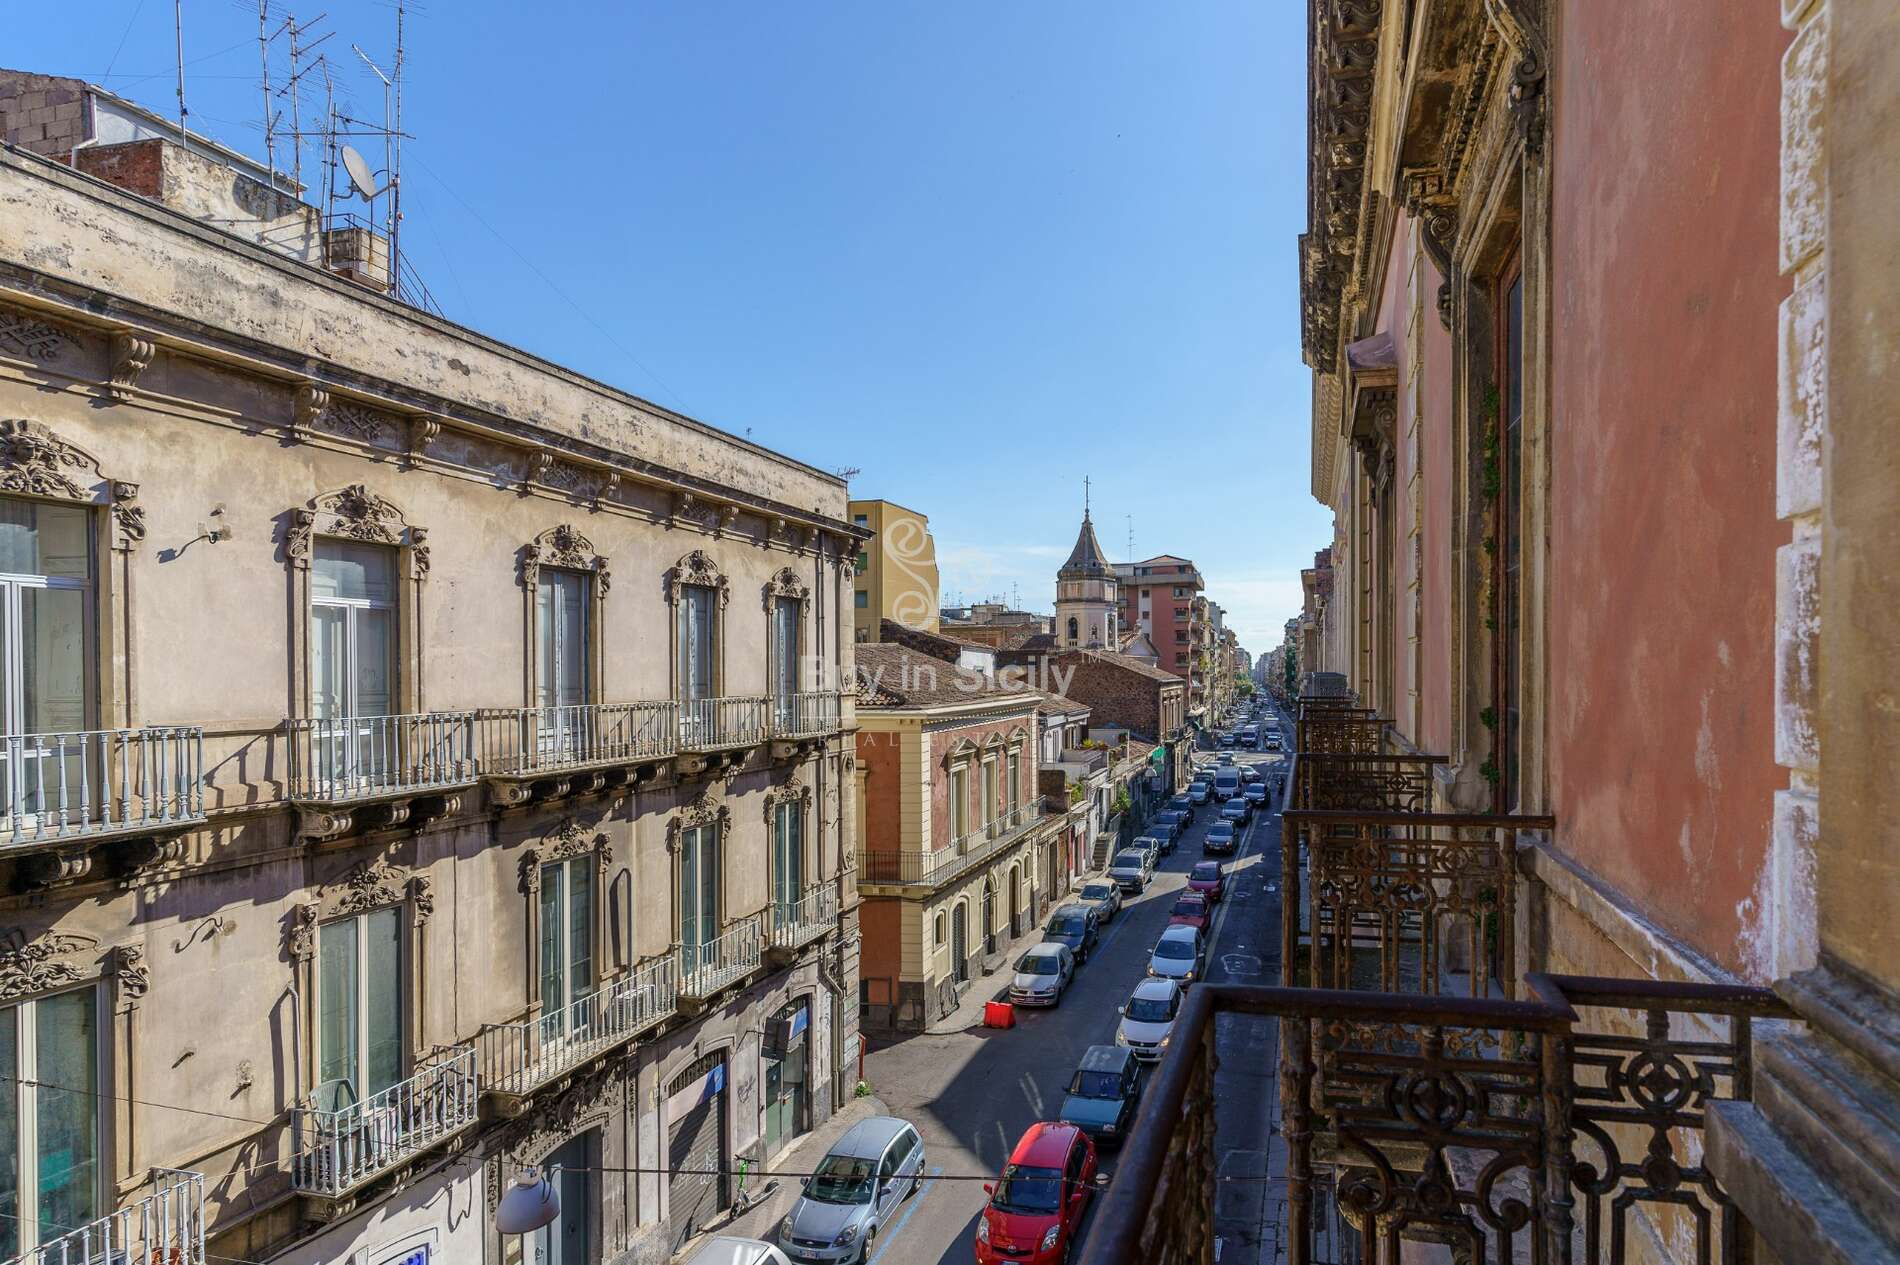 Period apartment located on the second noble floor of an important historic building in Catania.